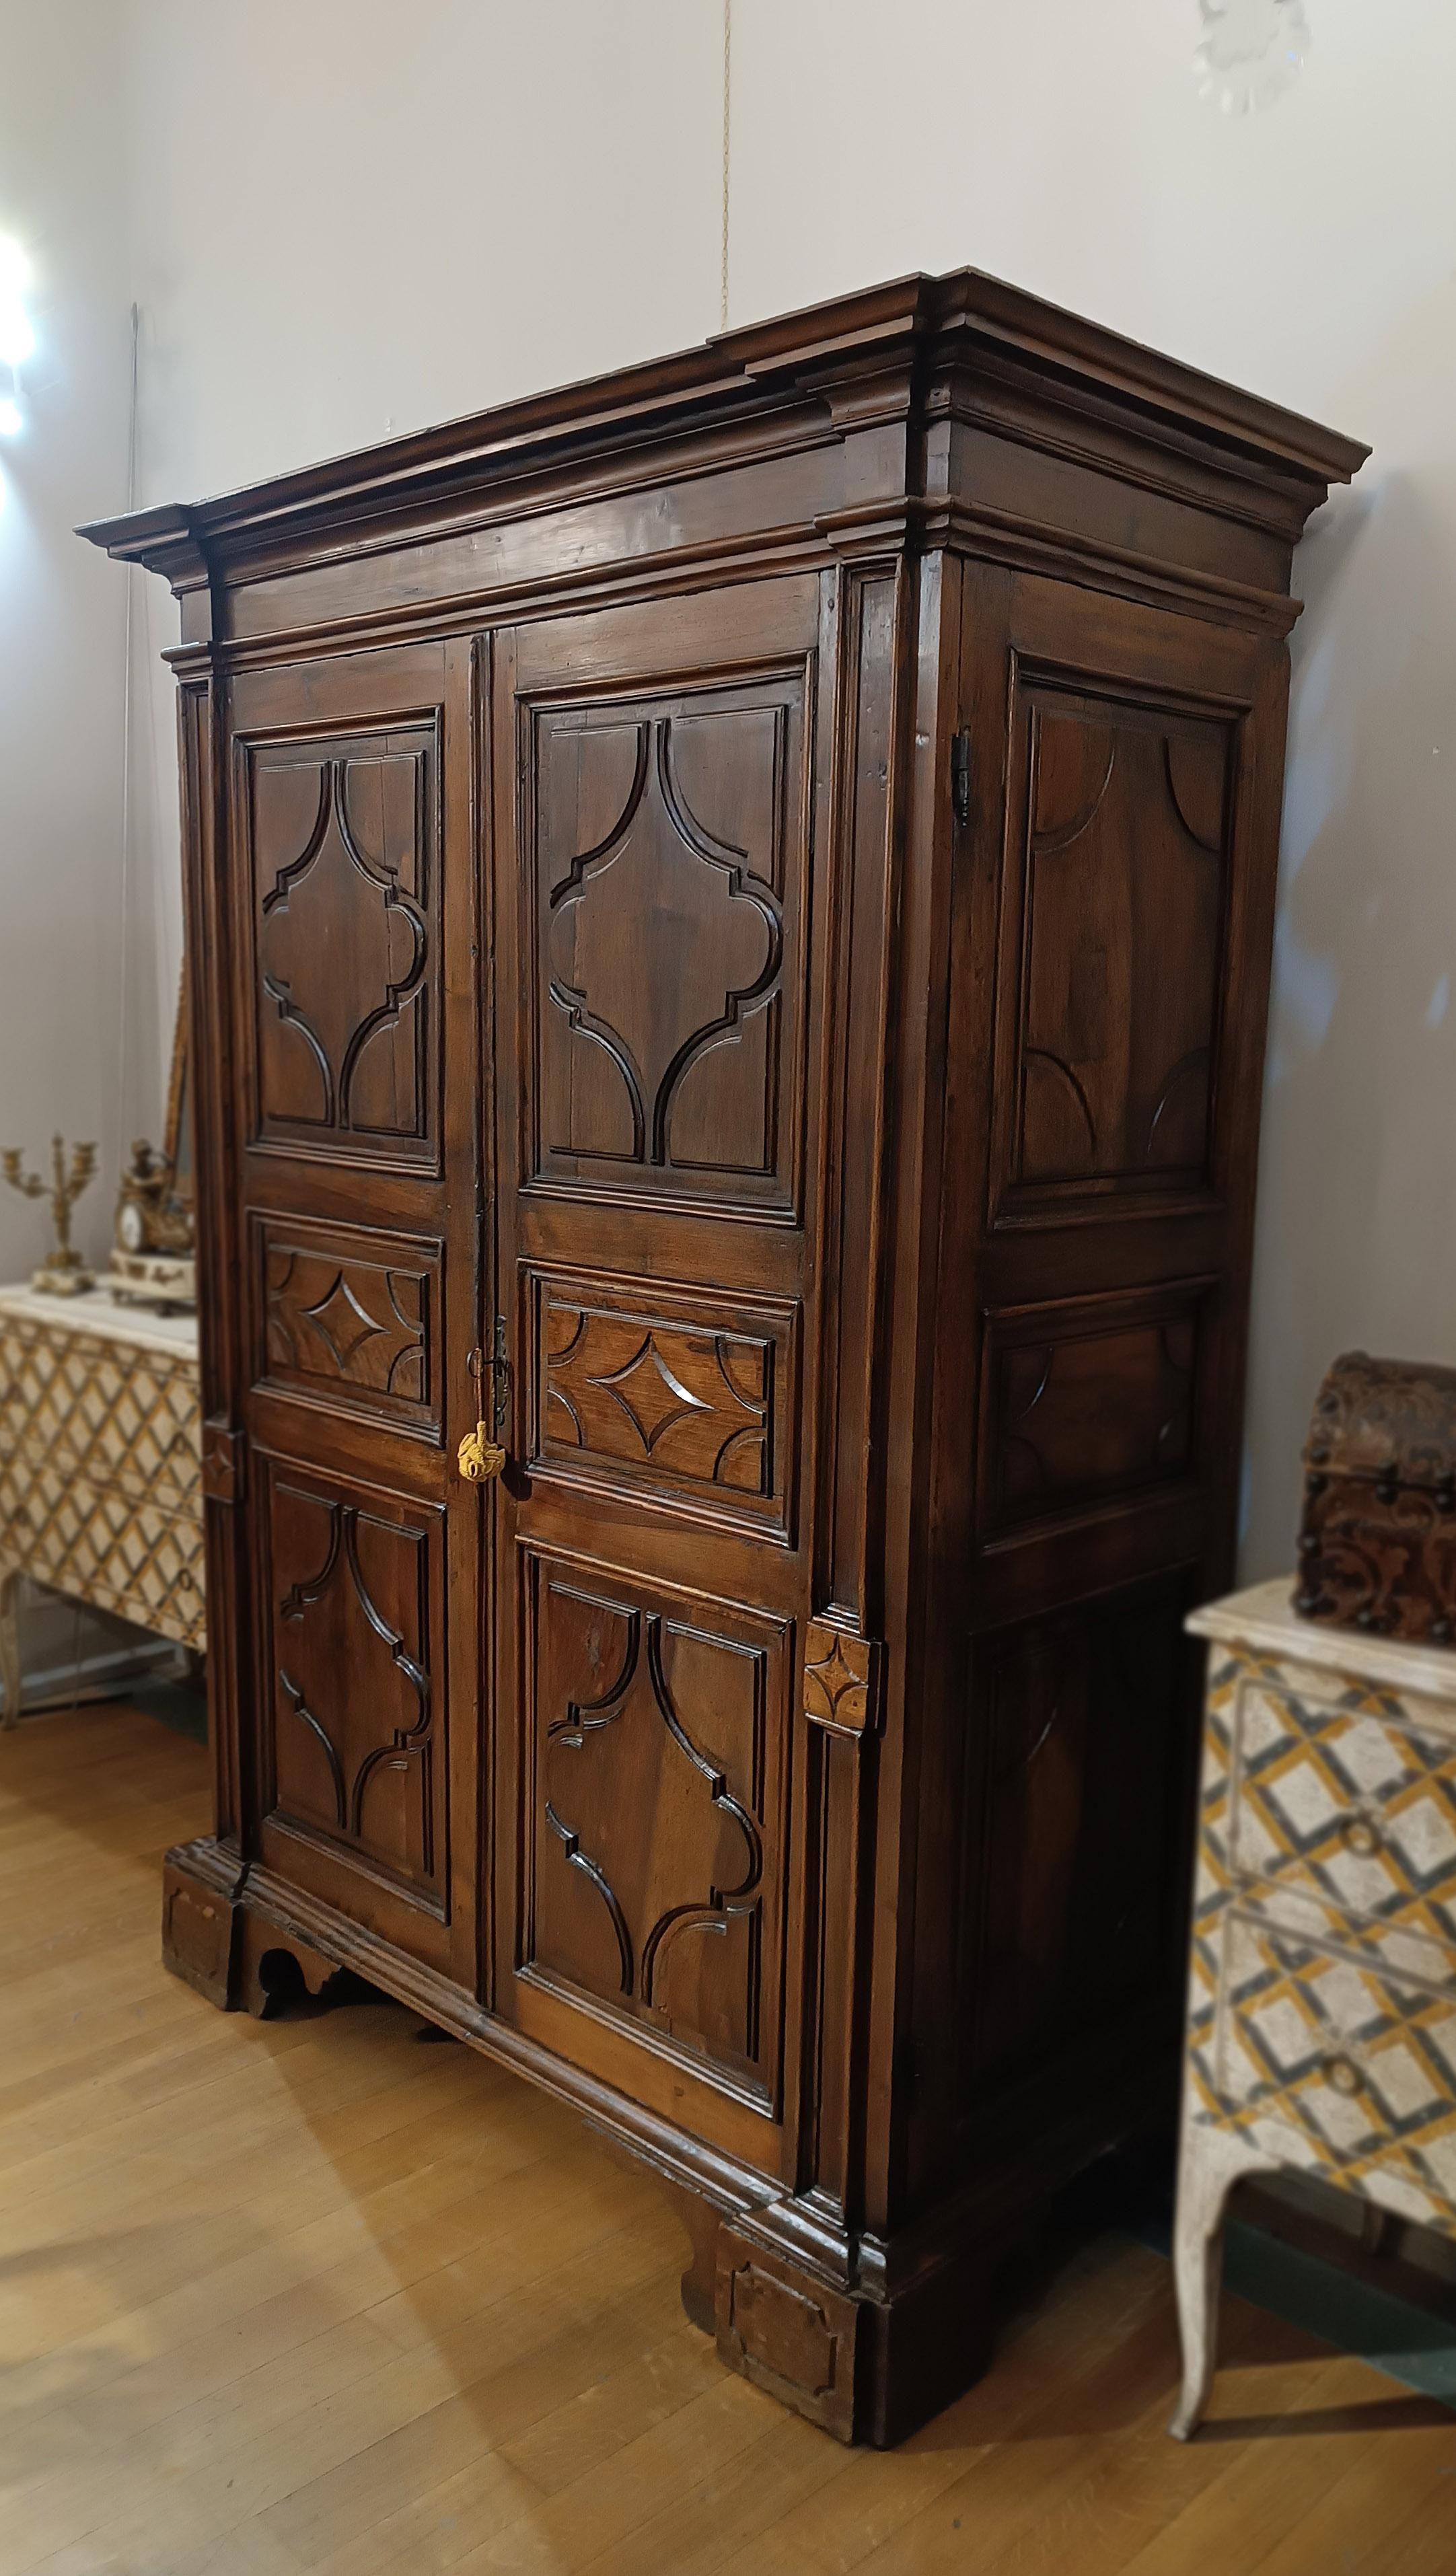 Italian END OF THE 17th CENTURY LOUIS XIV WARDROBE IN SOLID WALNUT For Sale